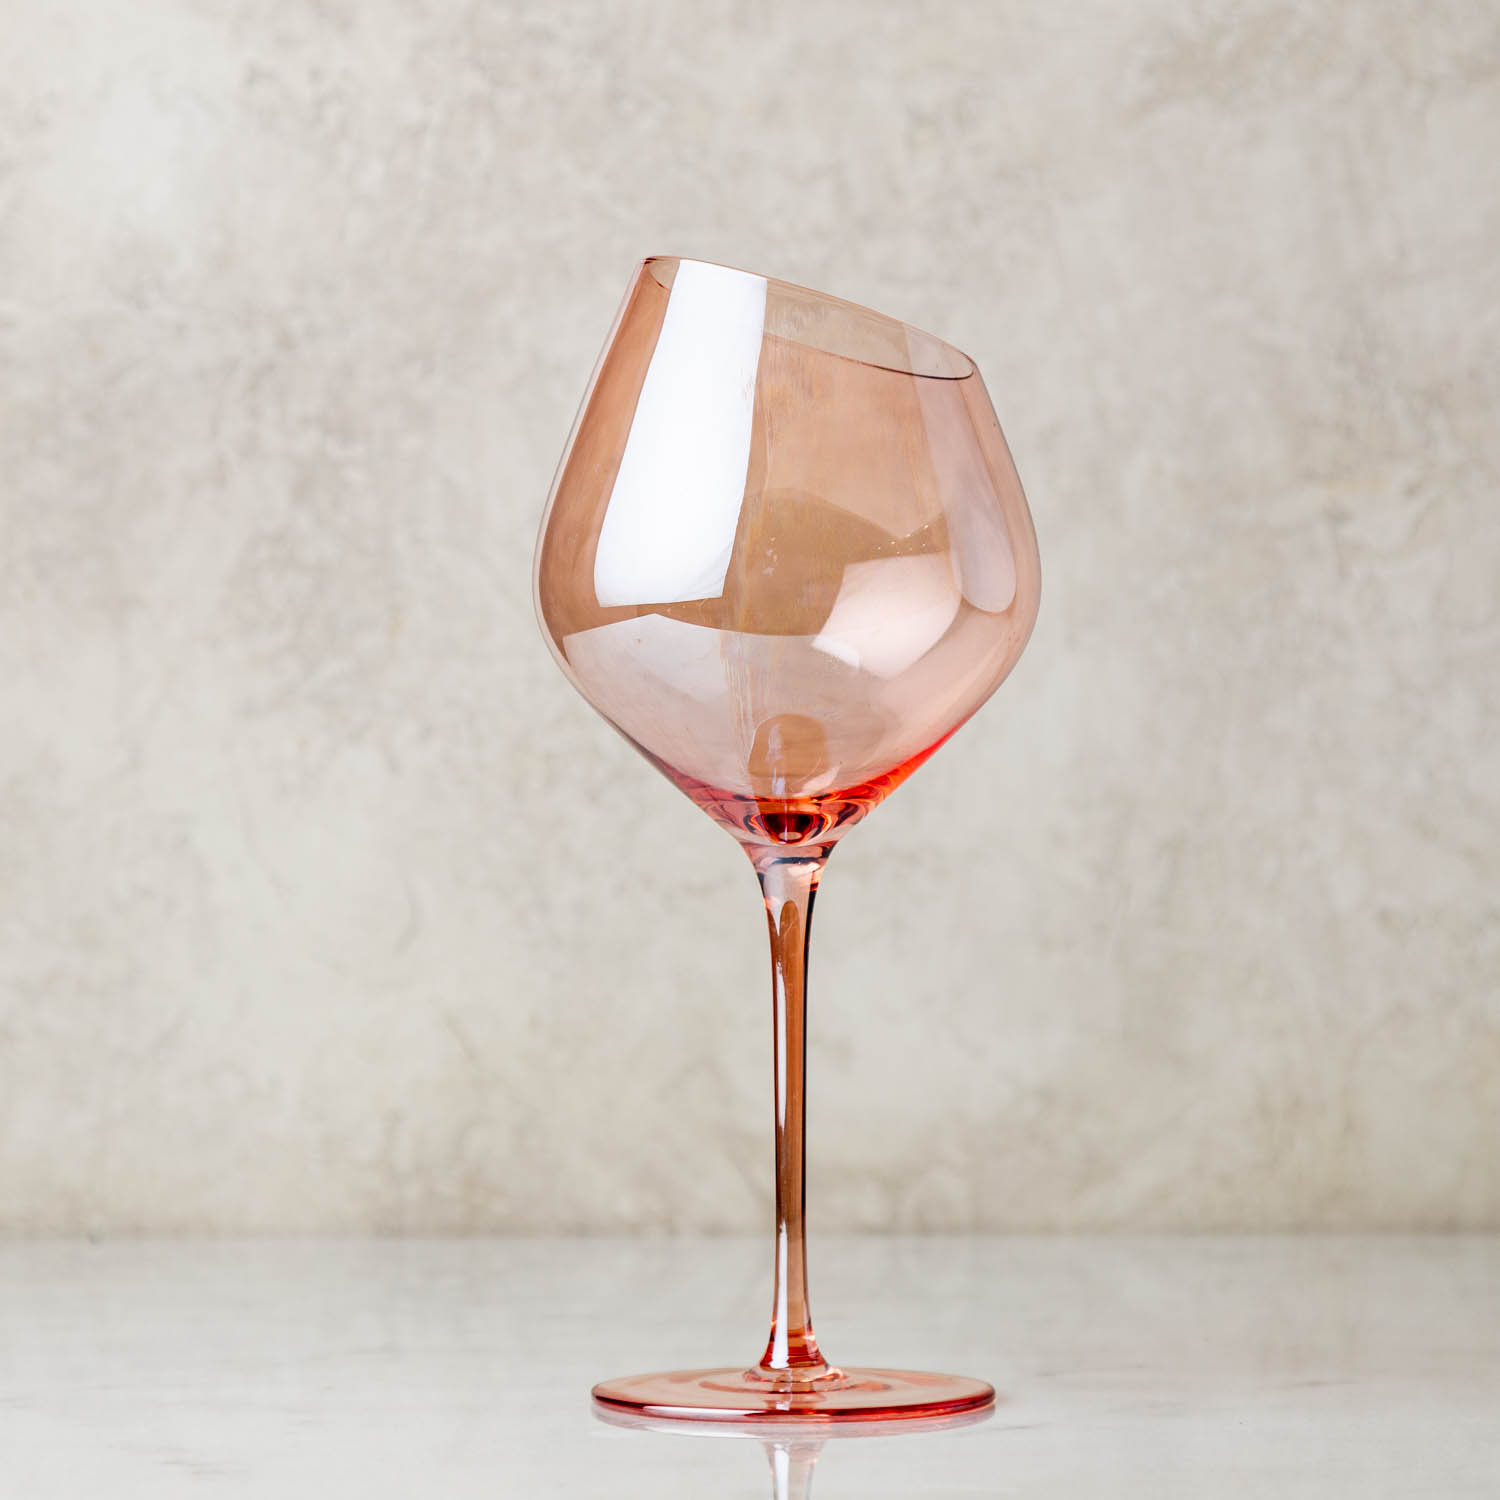 https://shop.coopershawkwinery.com/images/product/P/Slant%20Peach%20Stemmed%20Glass-01.jpg